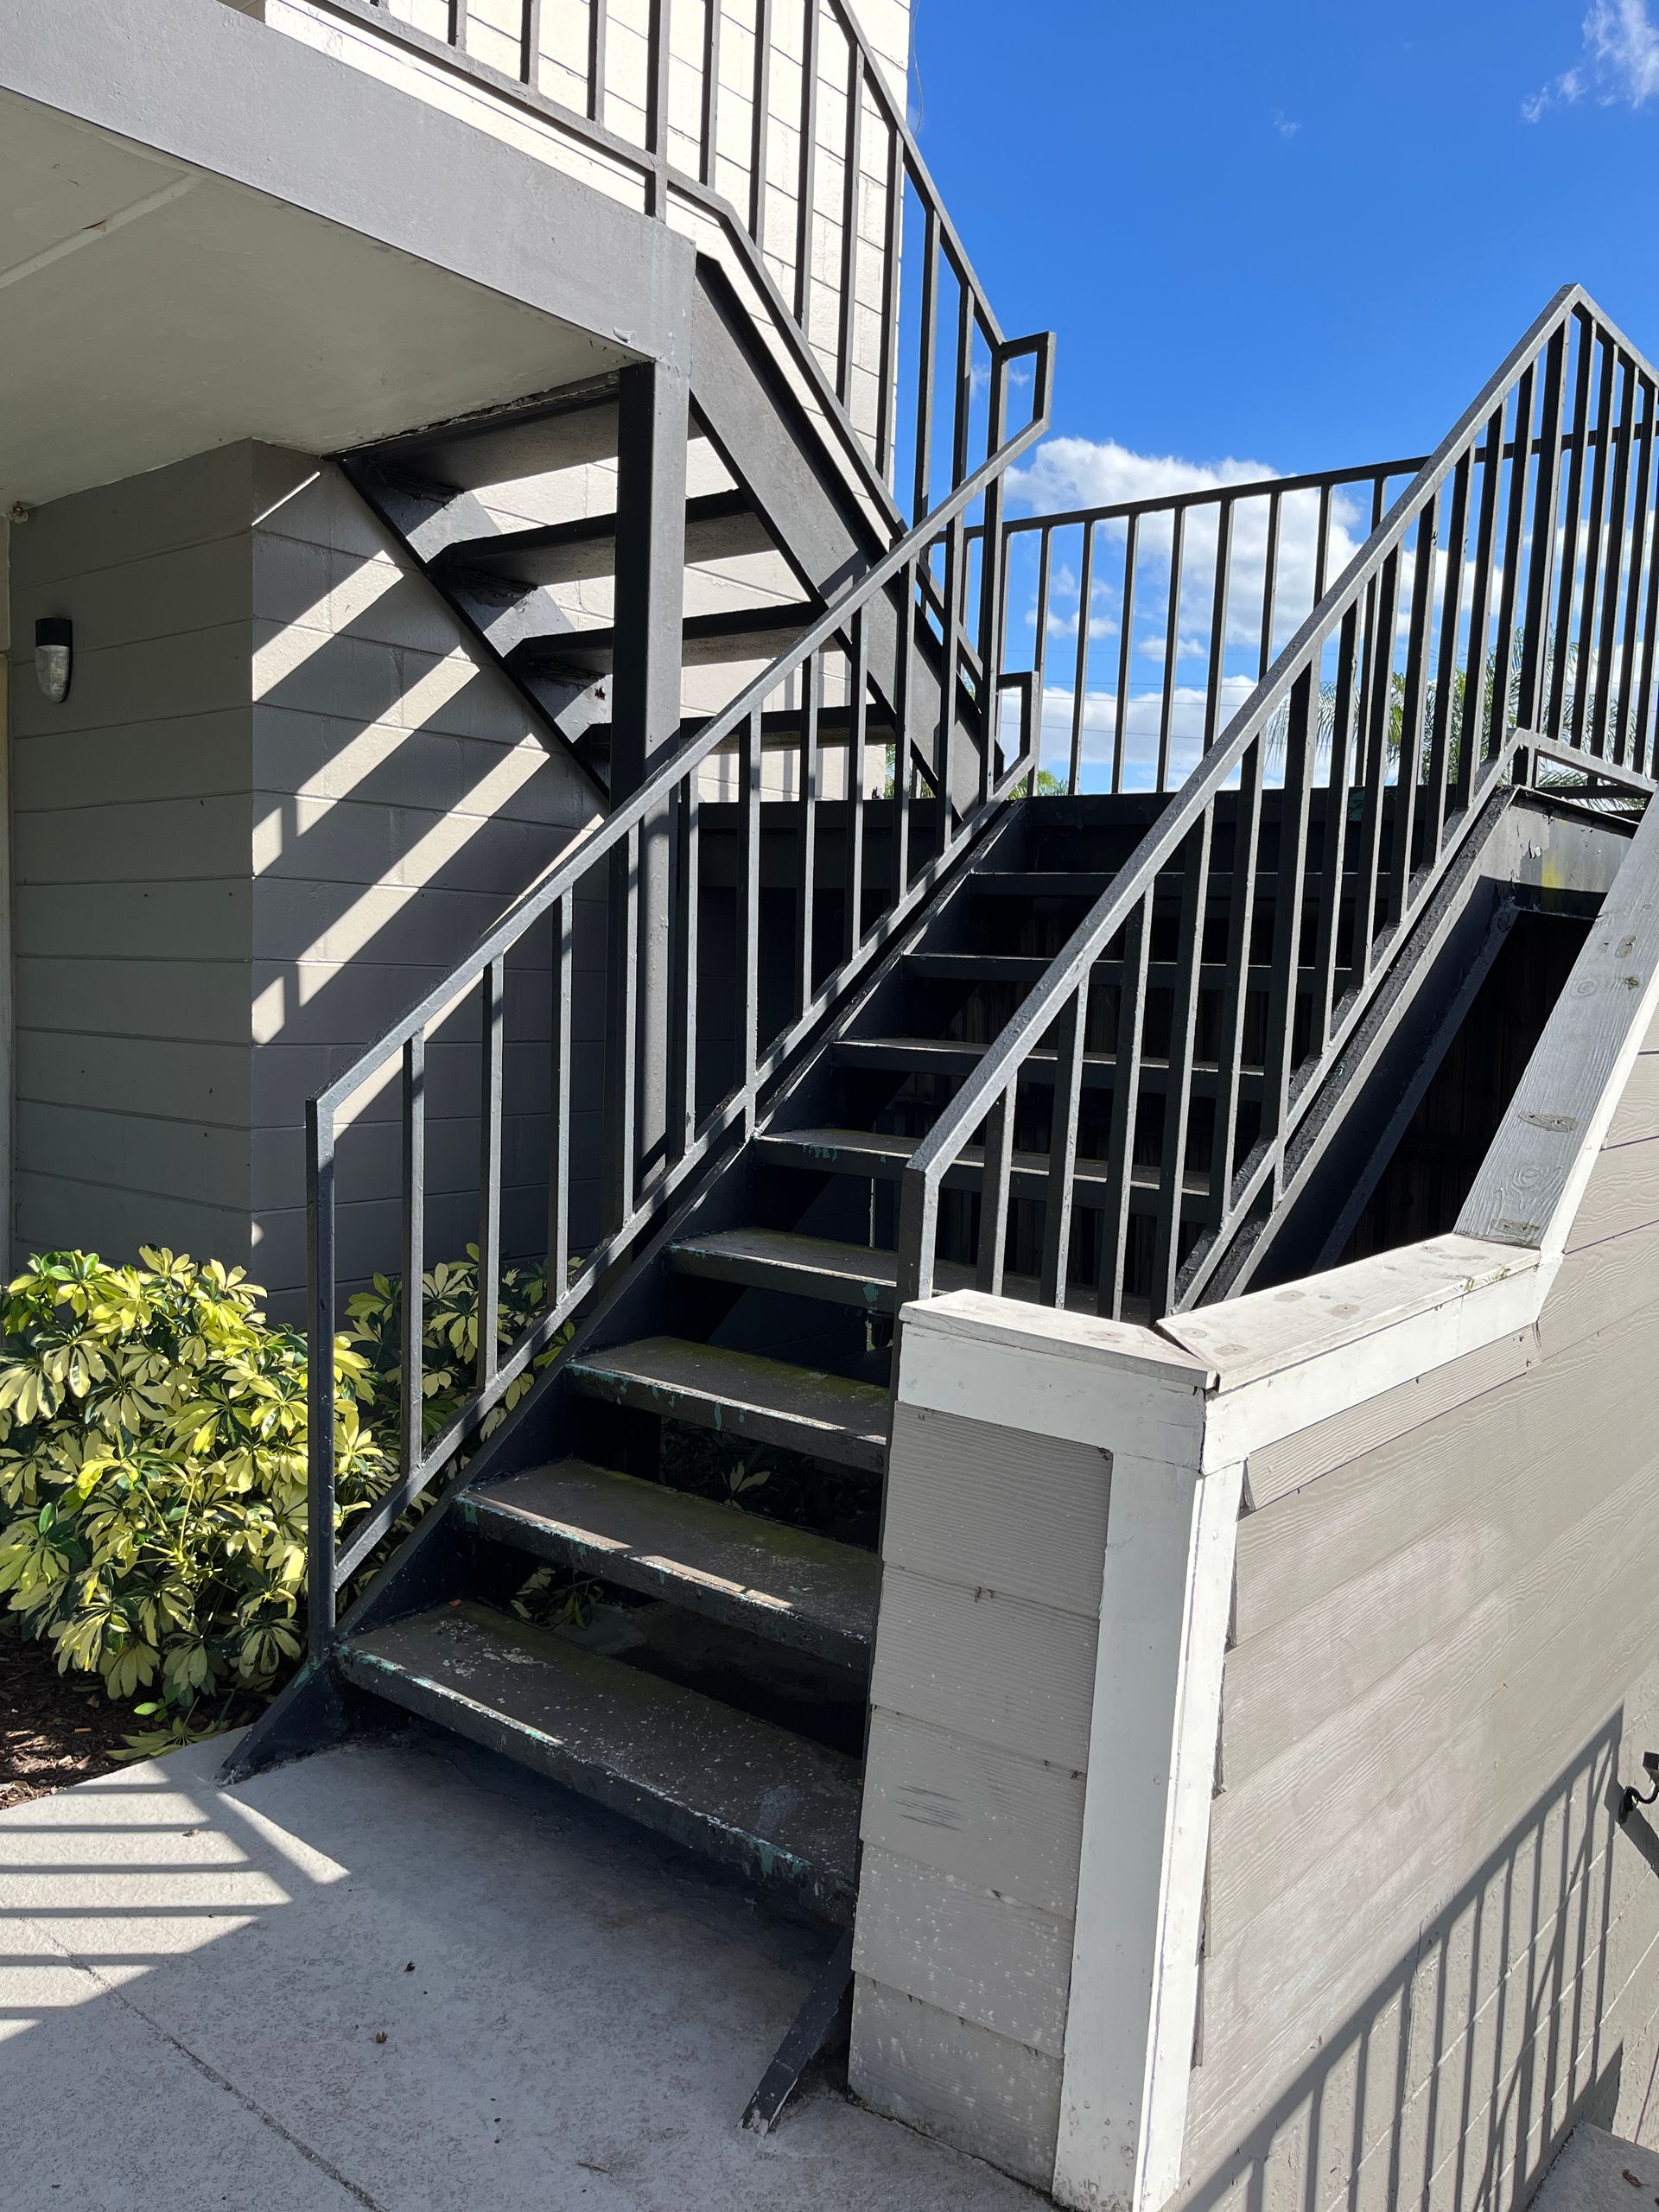 Exterior switchback stairs with full metal construction